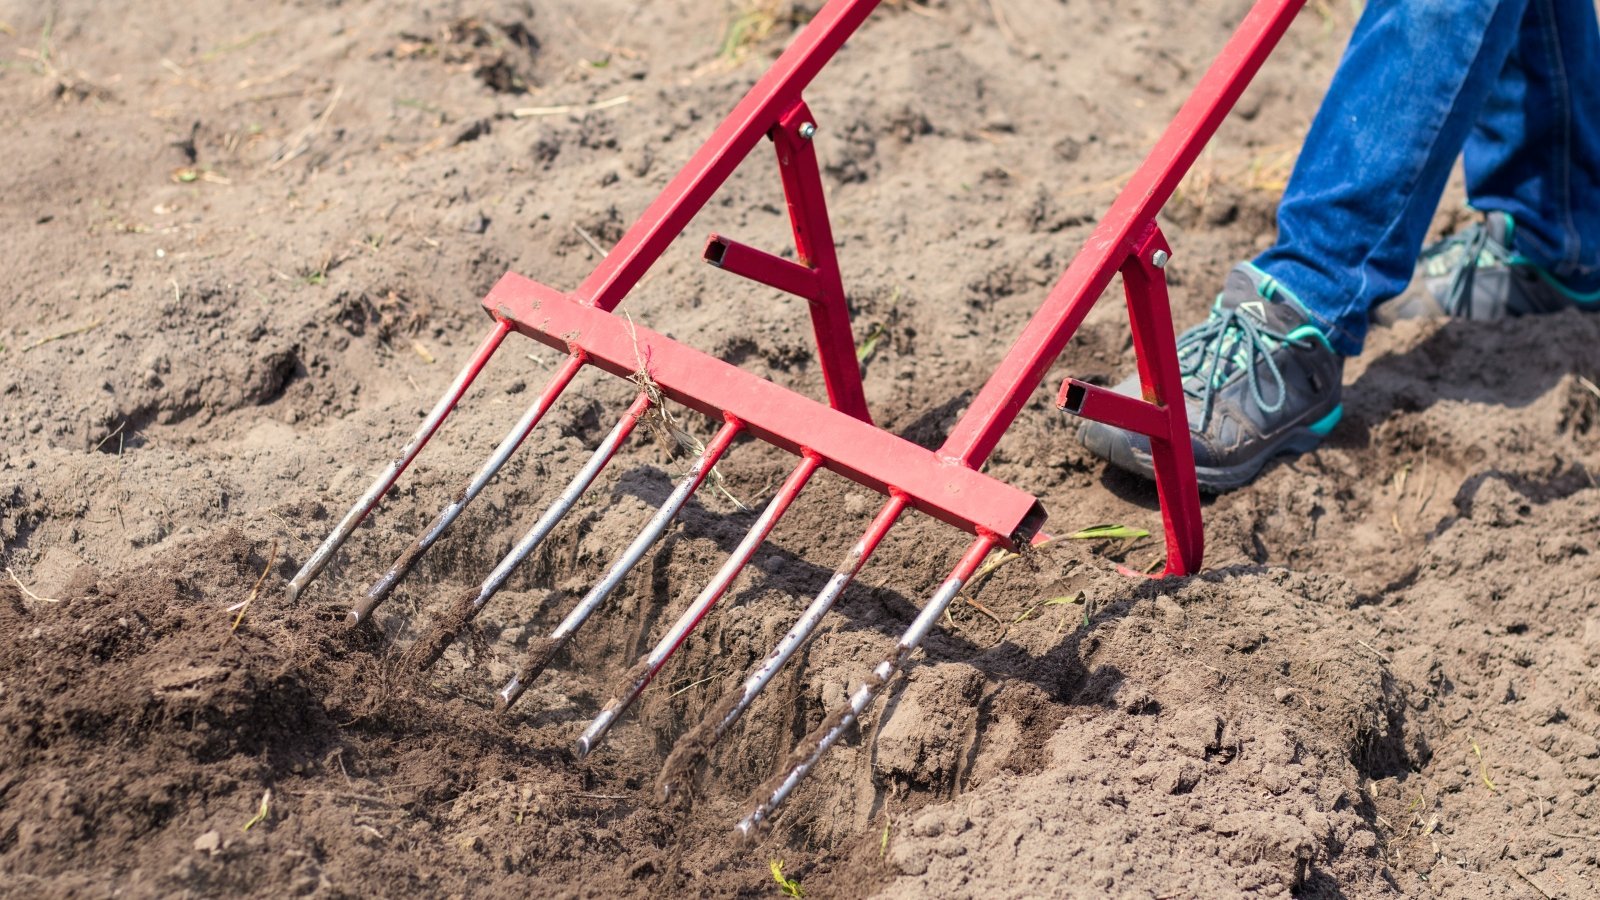 During the broadforking process, a gardener inserts the tool's tines into the soil and leans back, utilizing body weight to break up compacted earth, creating deep, loosened channels for soil aeration.